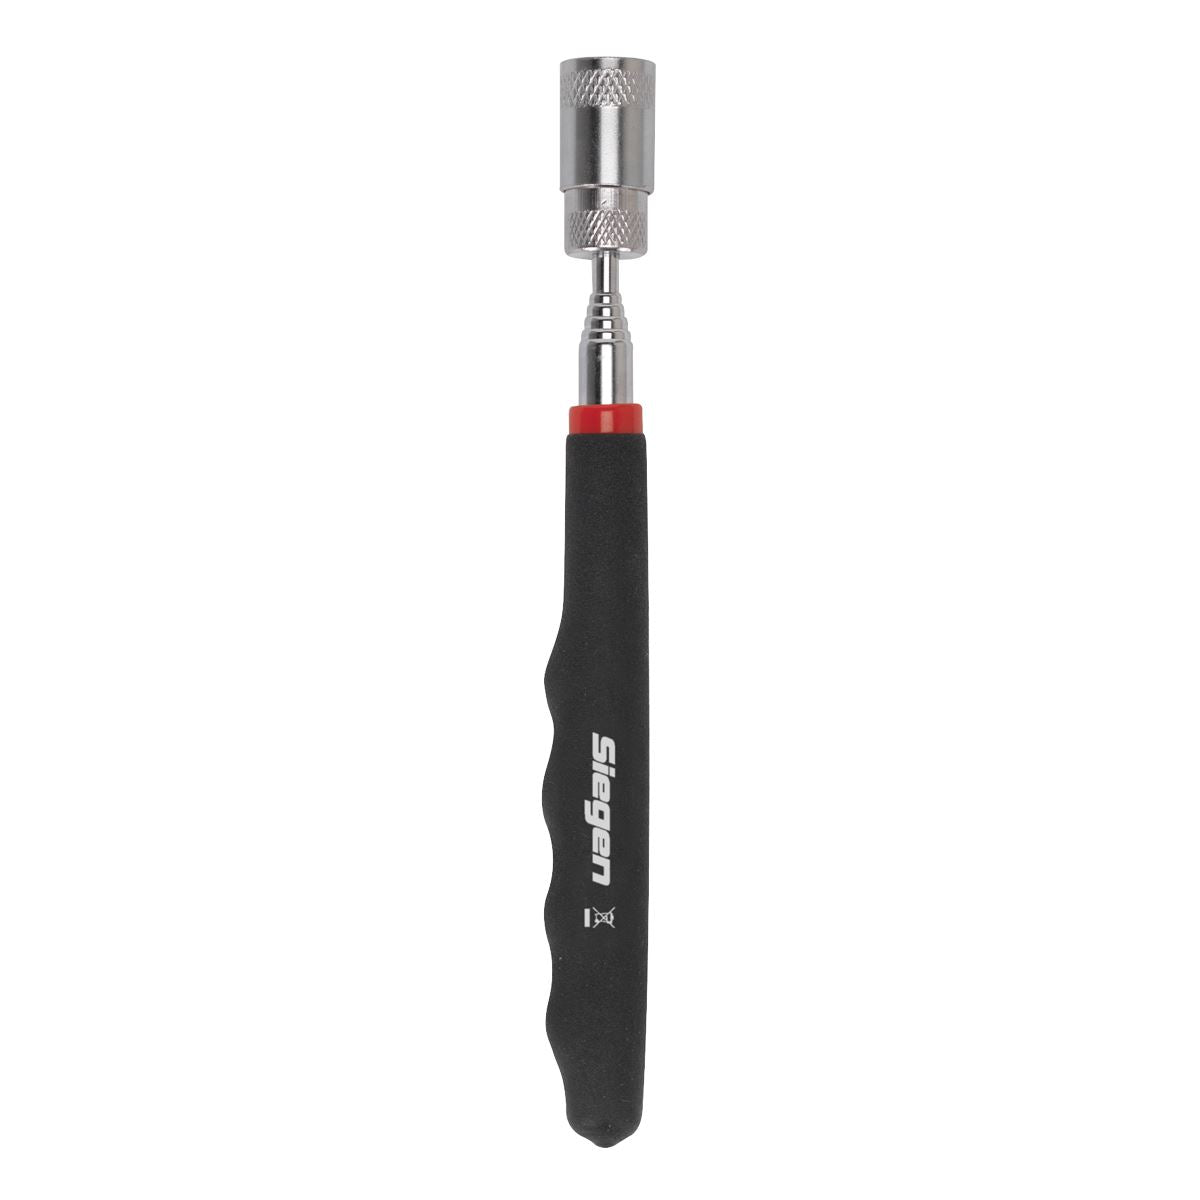 Siegen by Sealey Heavy-Duty Magnetic Pick-Up Tool with LED 3.6kg Capacity